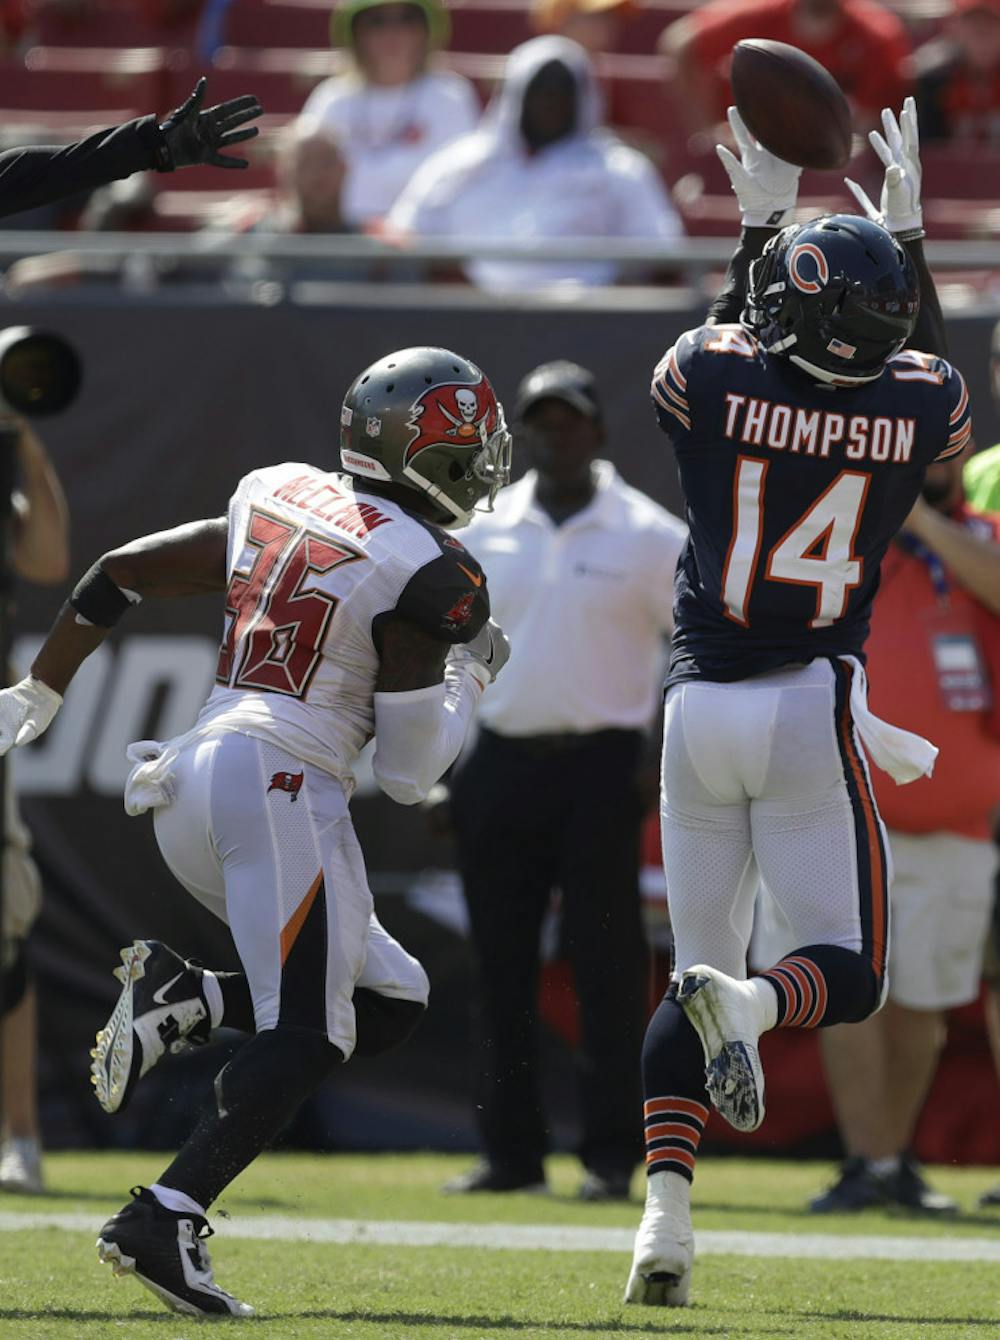 <p>Chicago Bears wide receiver Deonte Thompson (14) catches a touchdown pass ahead of Tampa Bay Buccaneers defensive back Robert McClain (36), during the second half of an NFL football game, Sunday, Sept. 17, 2017, in Tampa, Fla. The Bucs defeated the Bears 29-7. (AP Photo/Chris O'Meara)</p>